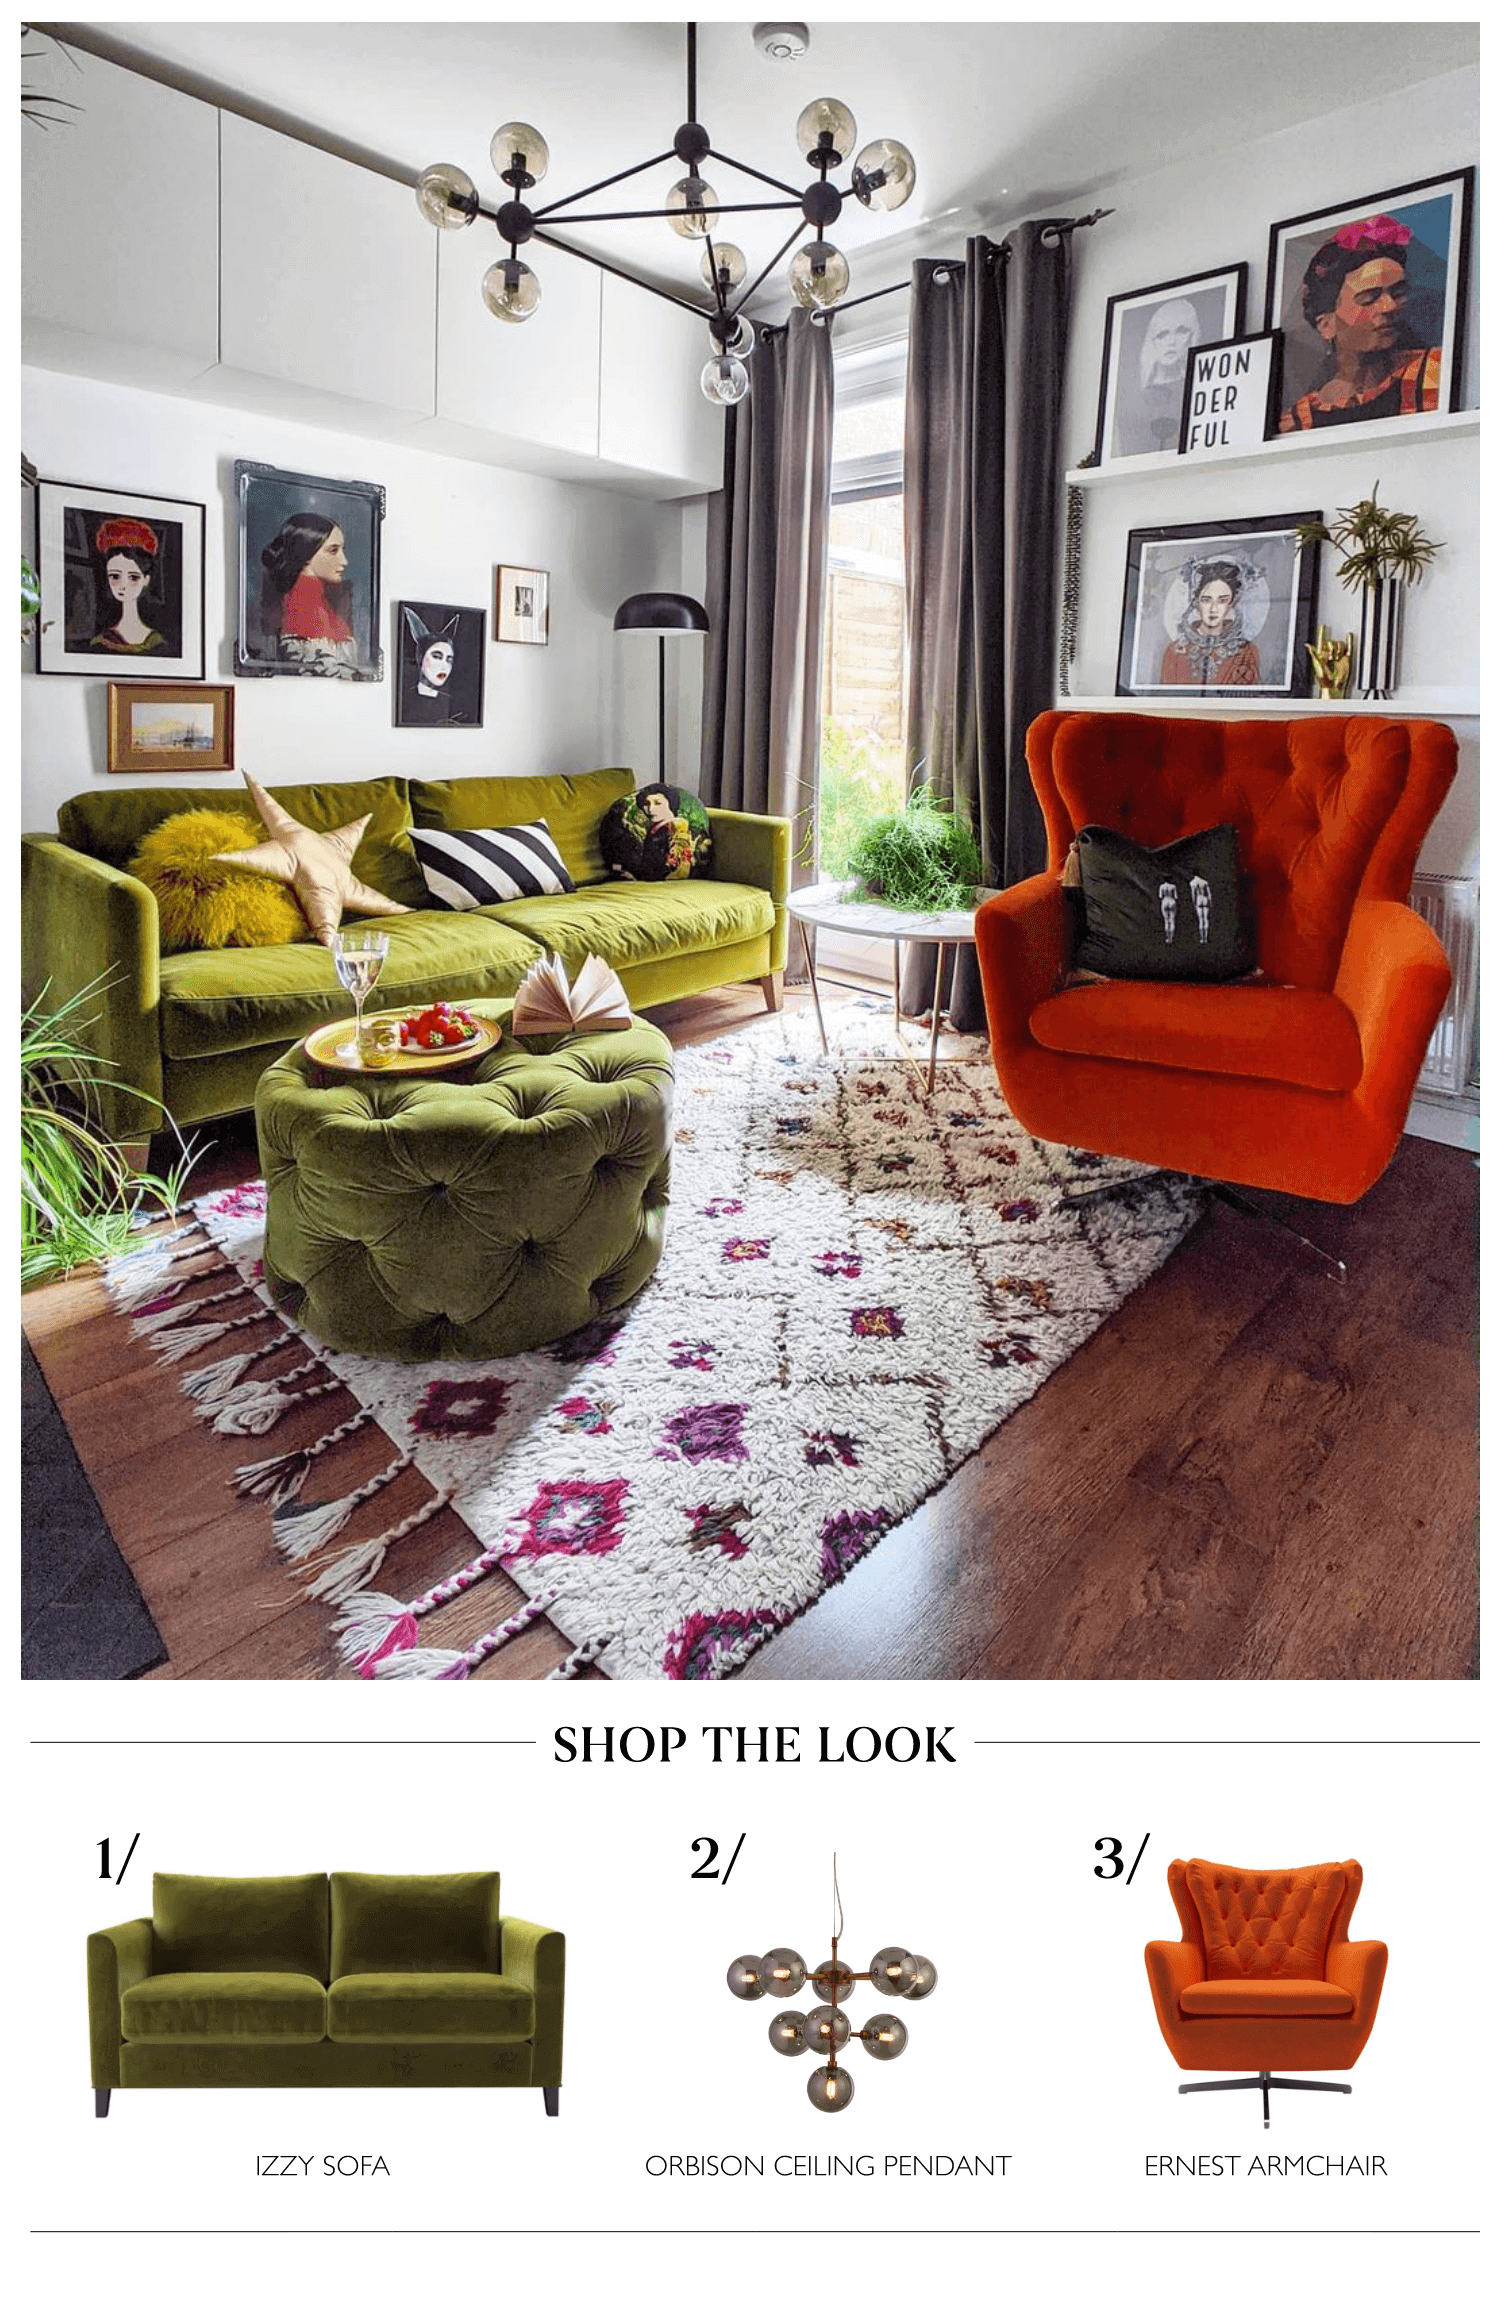 Autumn interiors 2020 styled by you - websait astiazh